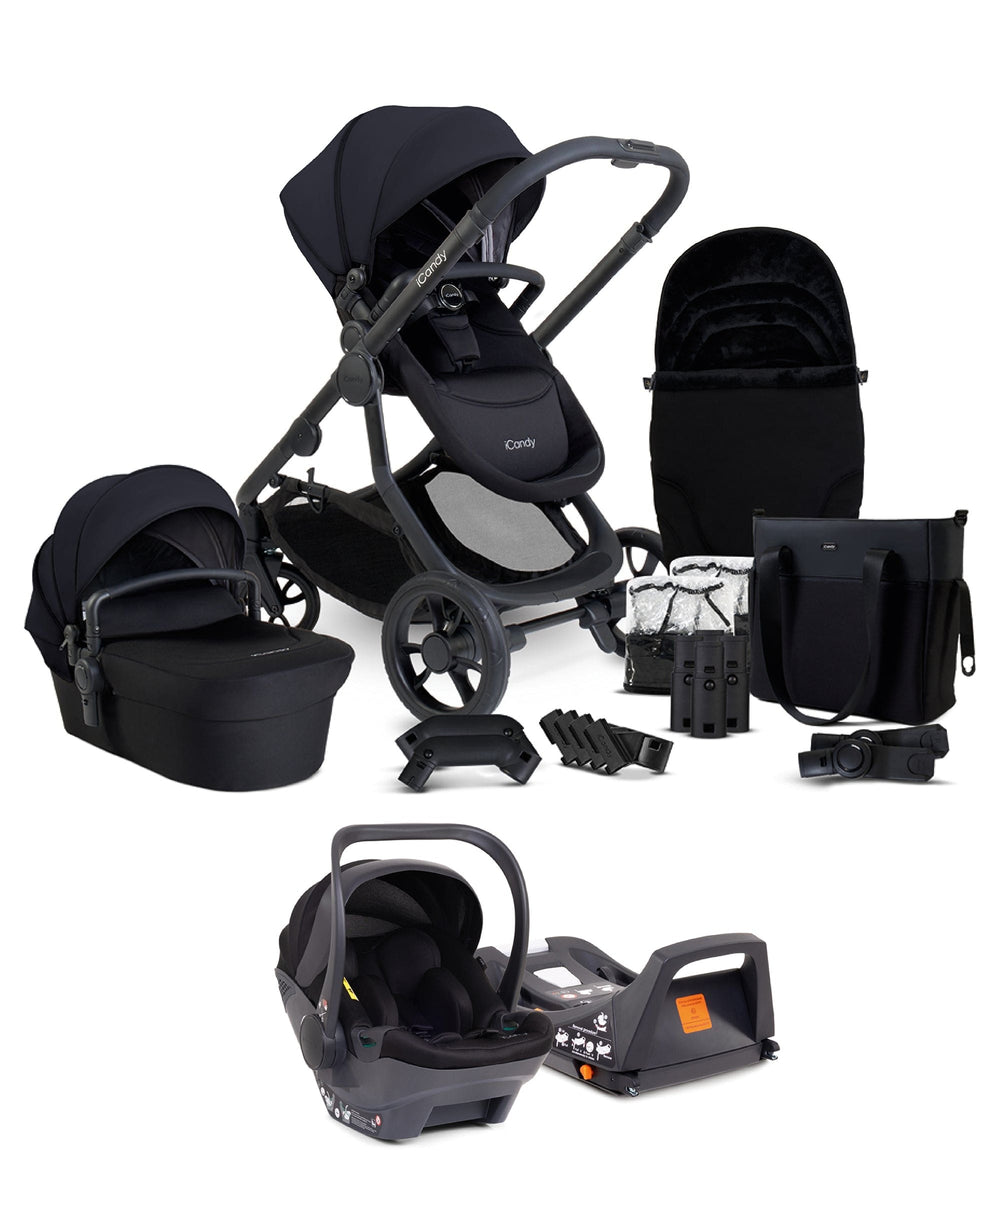 iCandy Pushchairs iCandy Orange4 Pushchair Bundle with iCandy Cocoon Car Seat & Base - Black